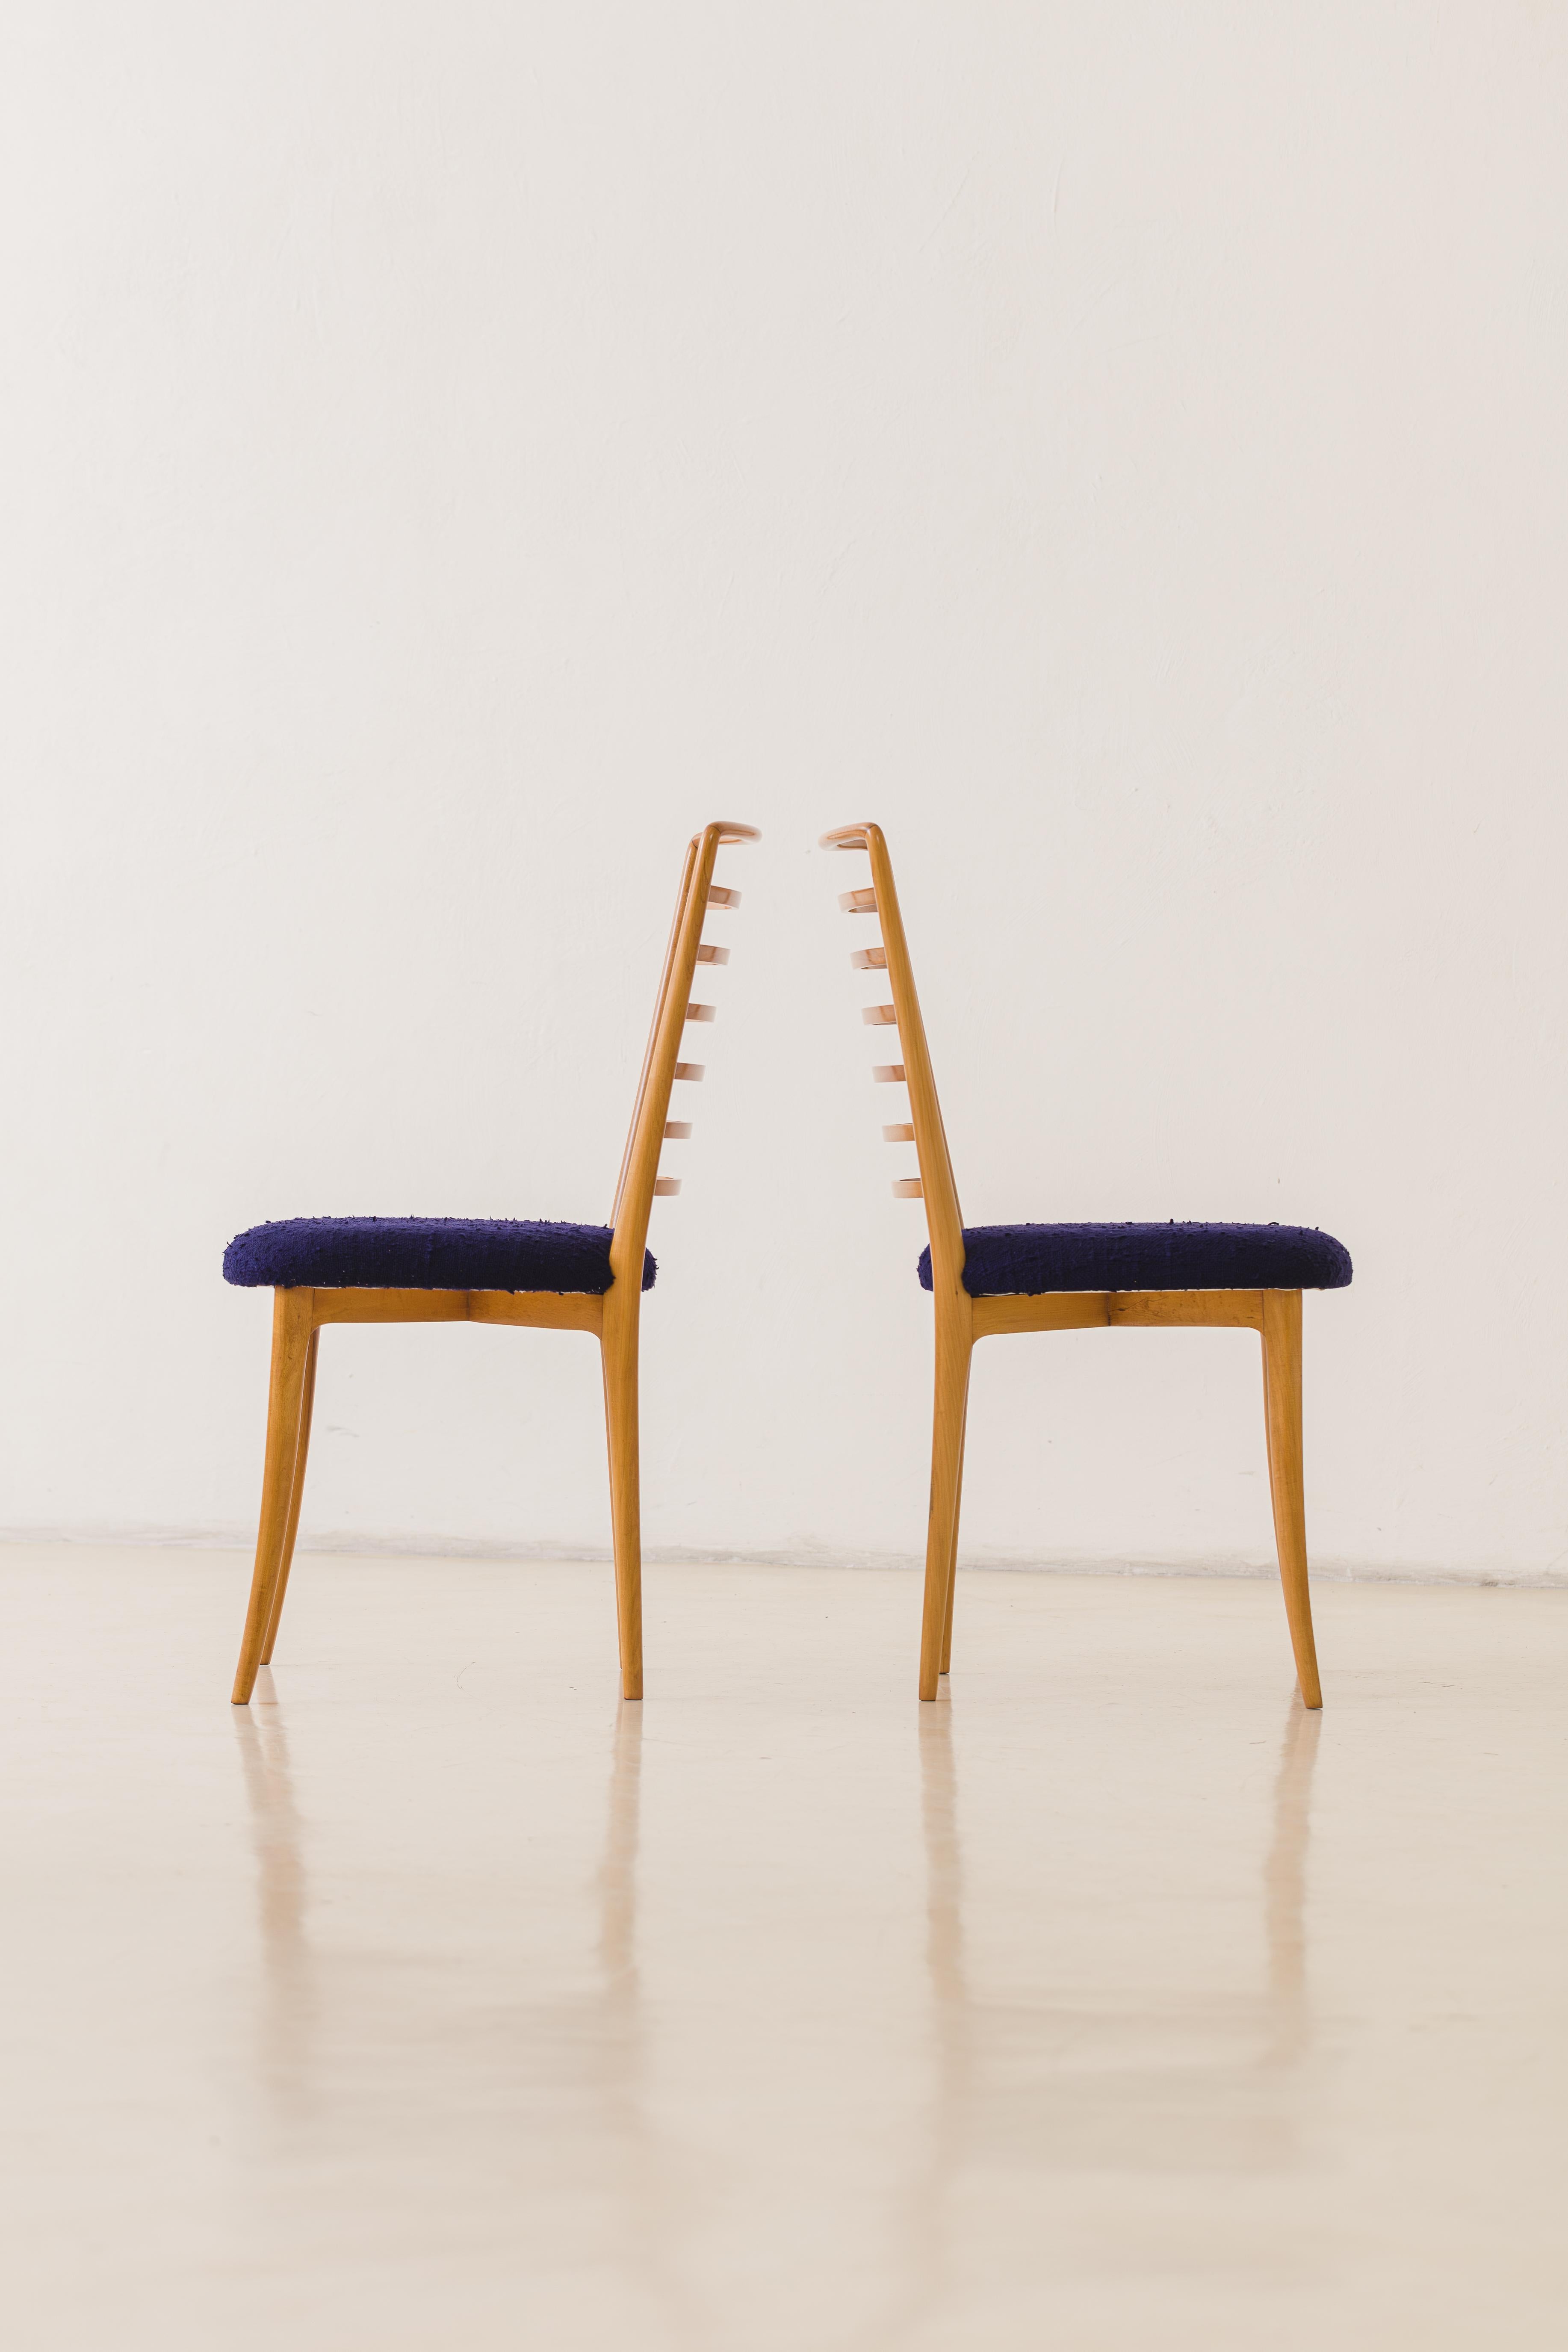 Joaquim Tenreiro Dining Chairs, Solid Wood and Fabric, MidCentury, Brazil, 1950s For Sale 2